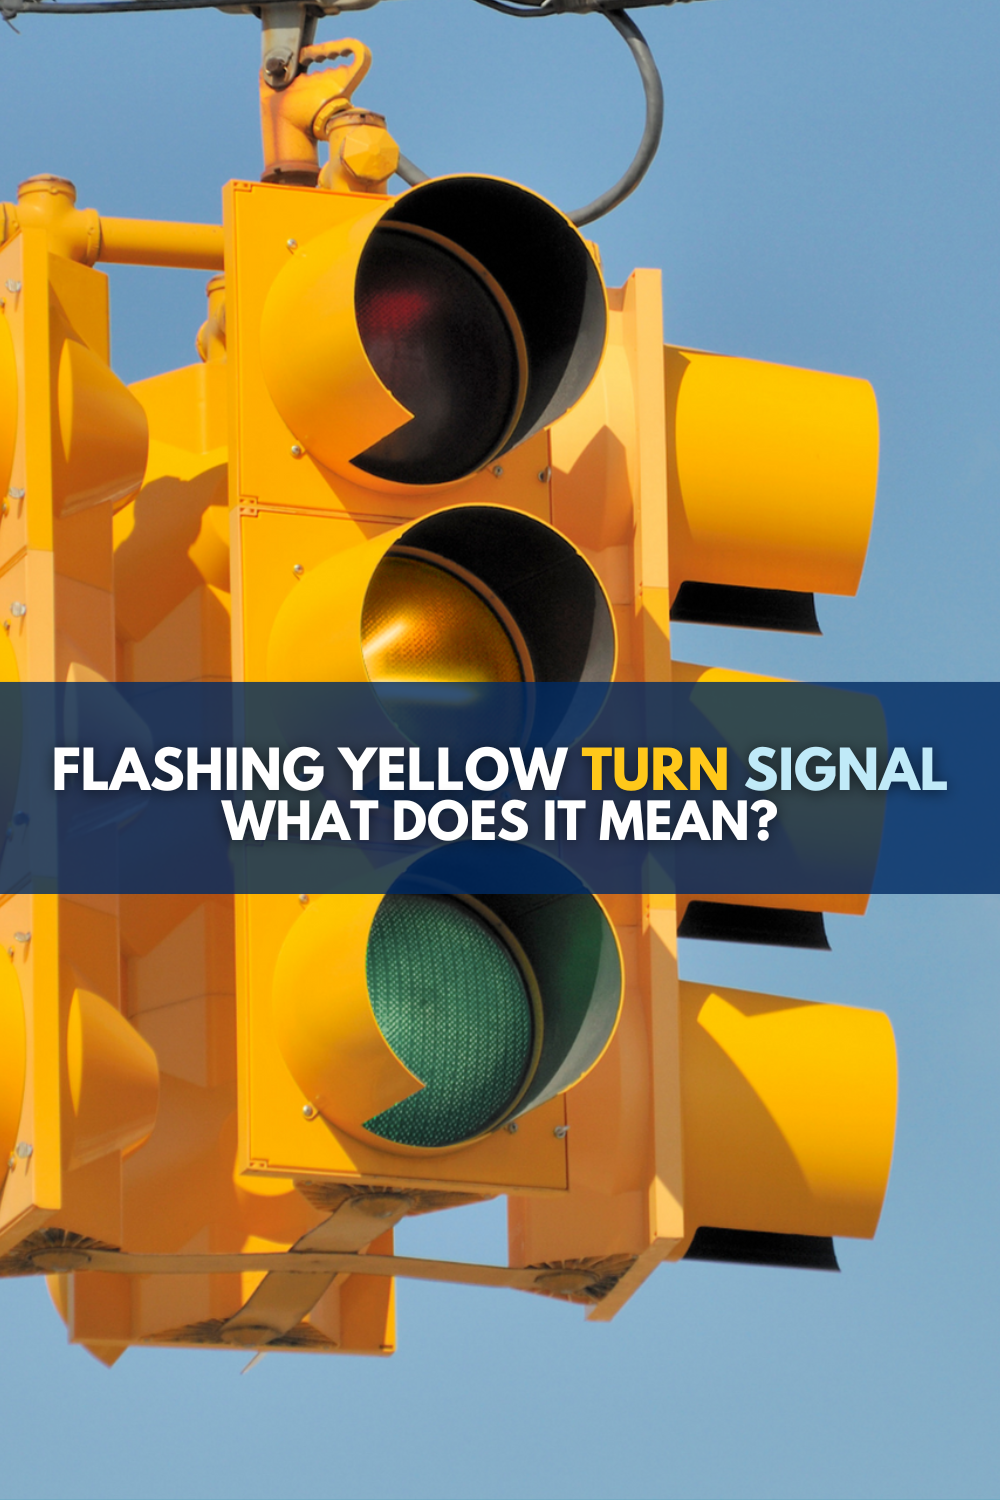 Flashing Yellow Turn Signal In Michigan: What Does It Mean?